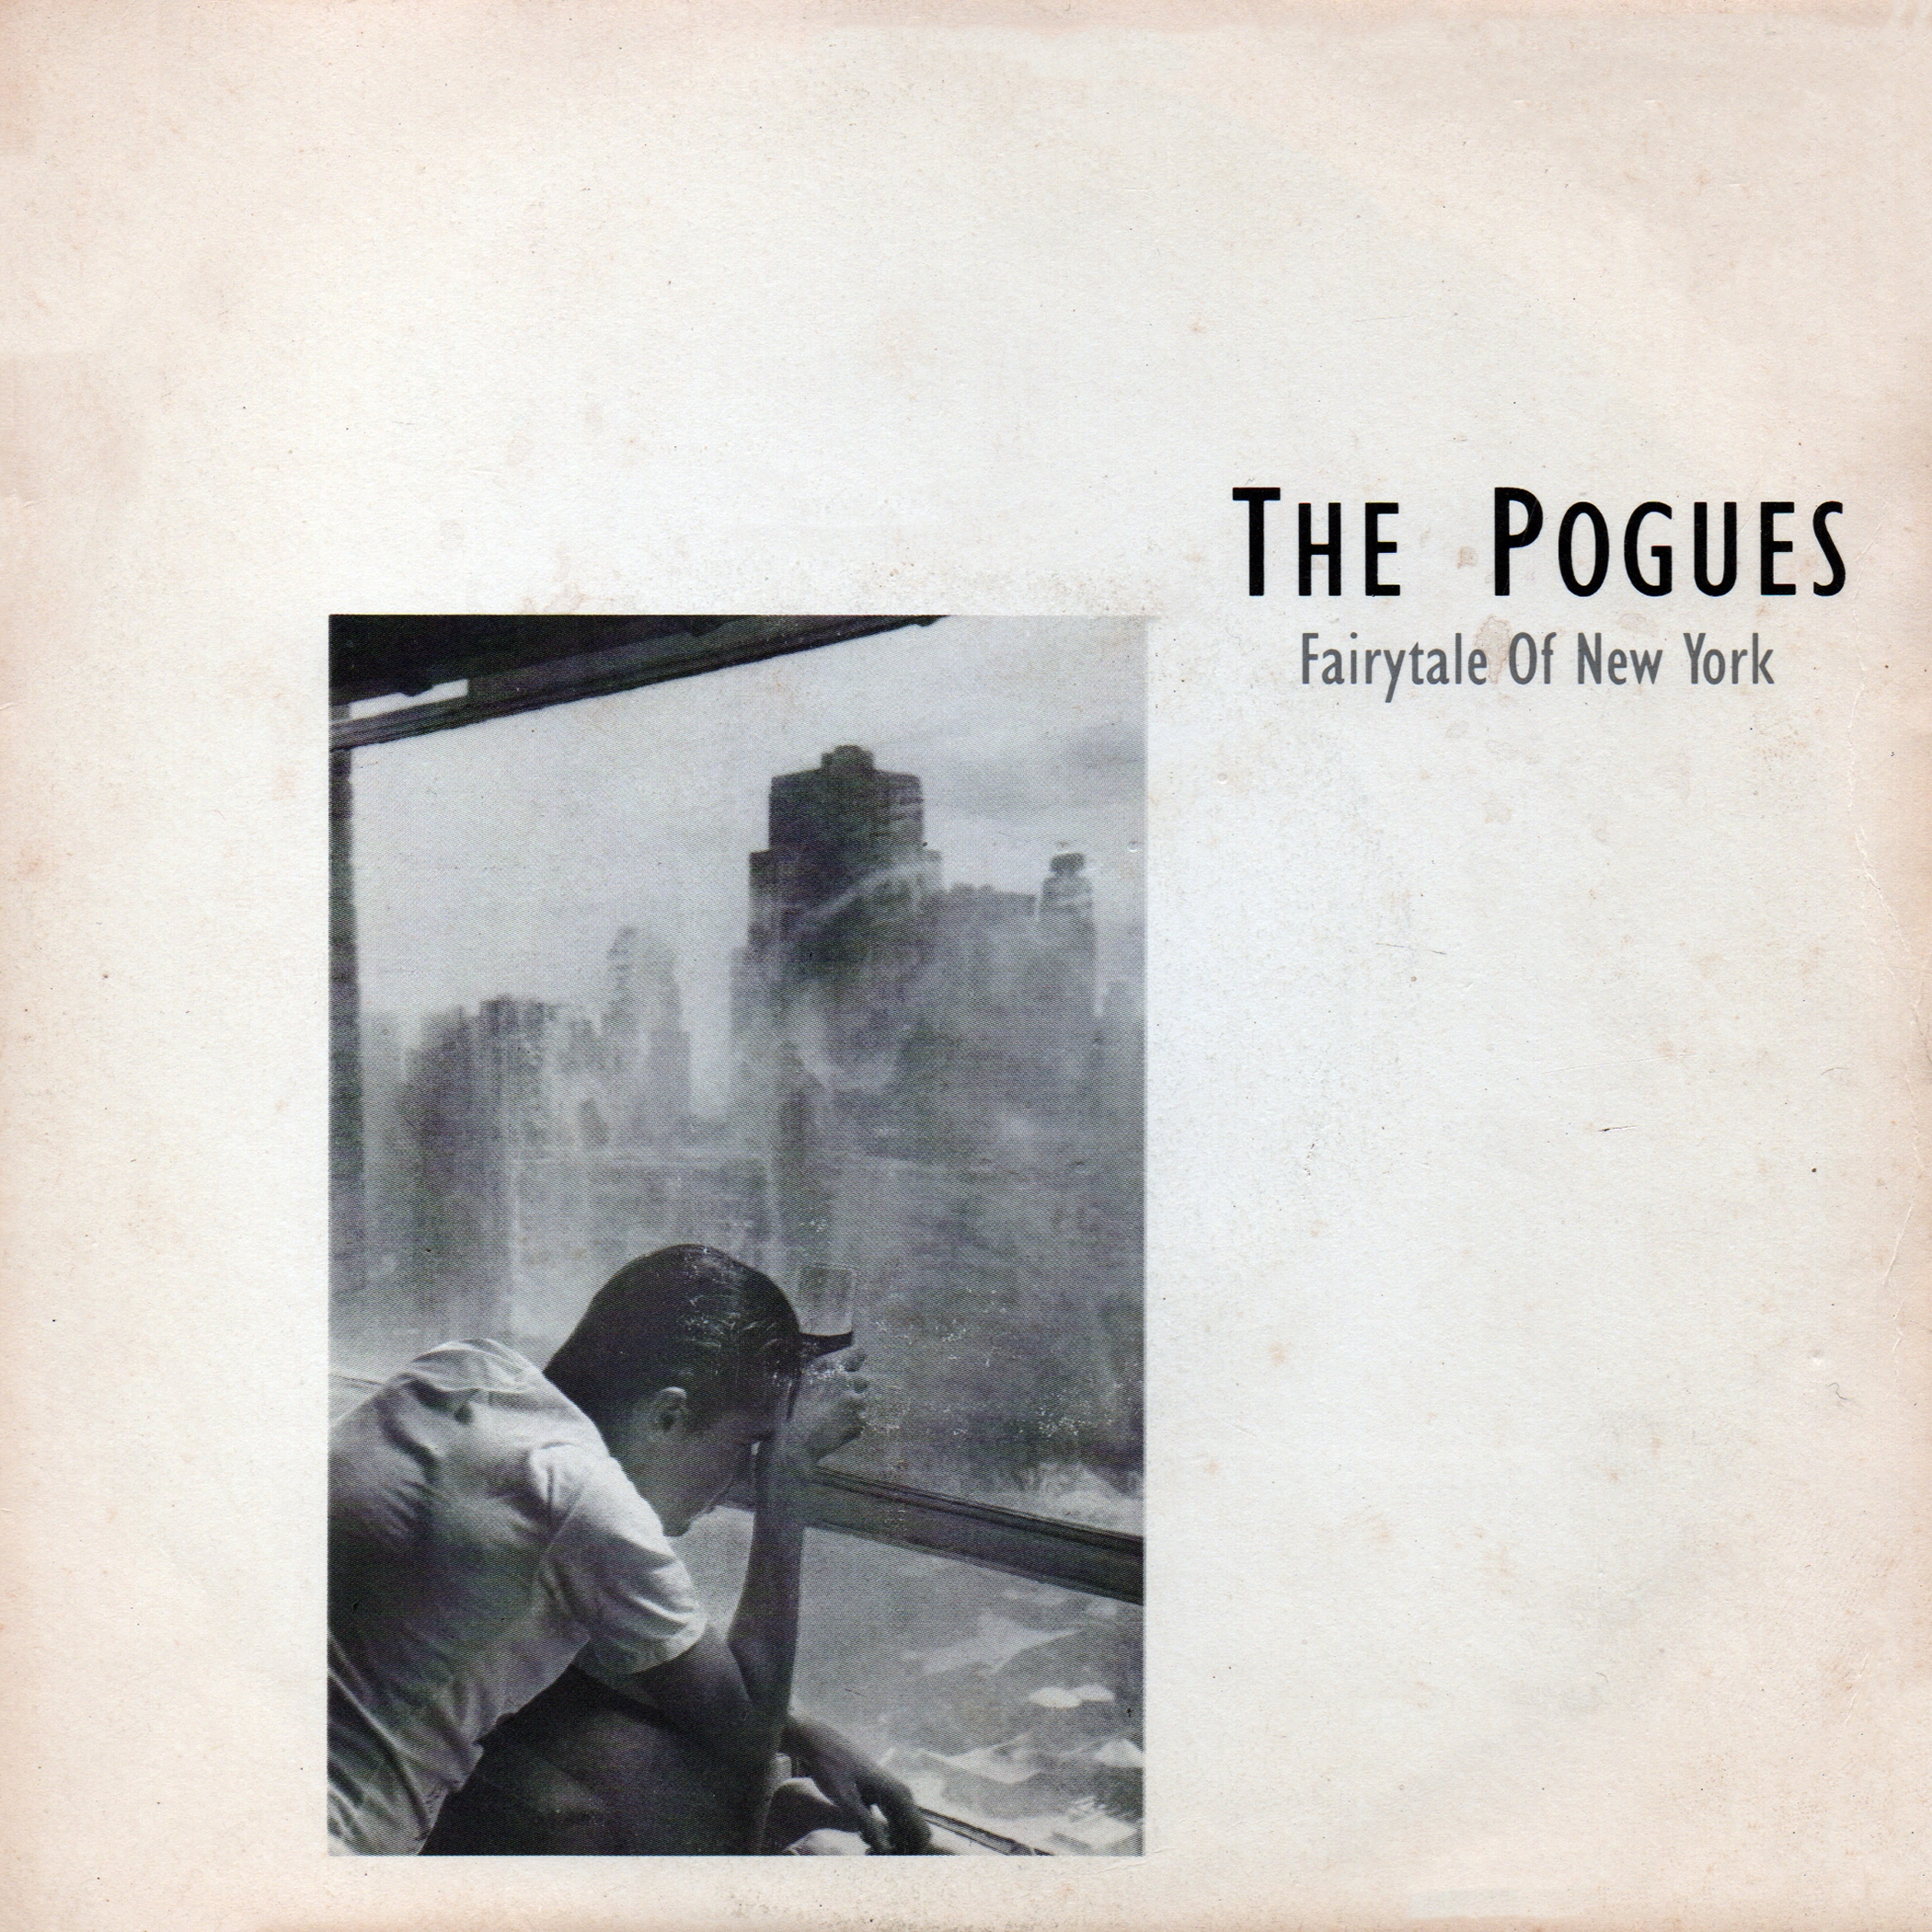 The Pogues feat. Kirsty MacColl - Fairytale of New York (1987) single 24-96 Vinyl